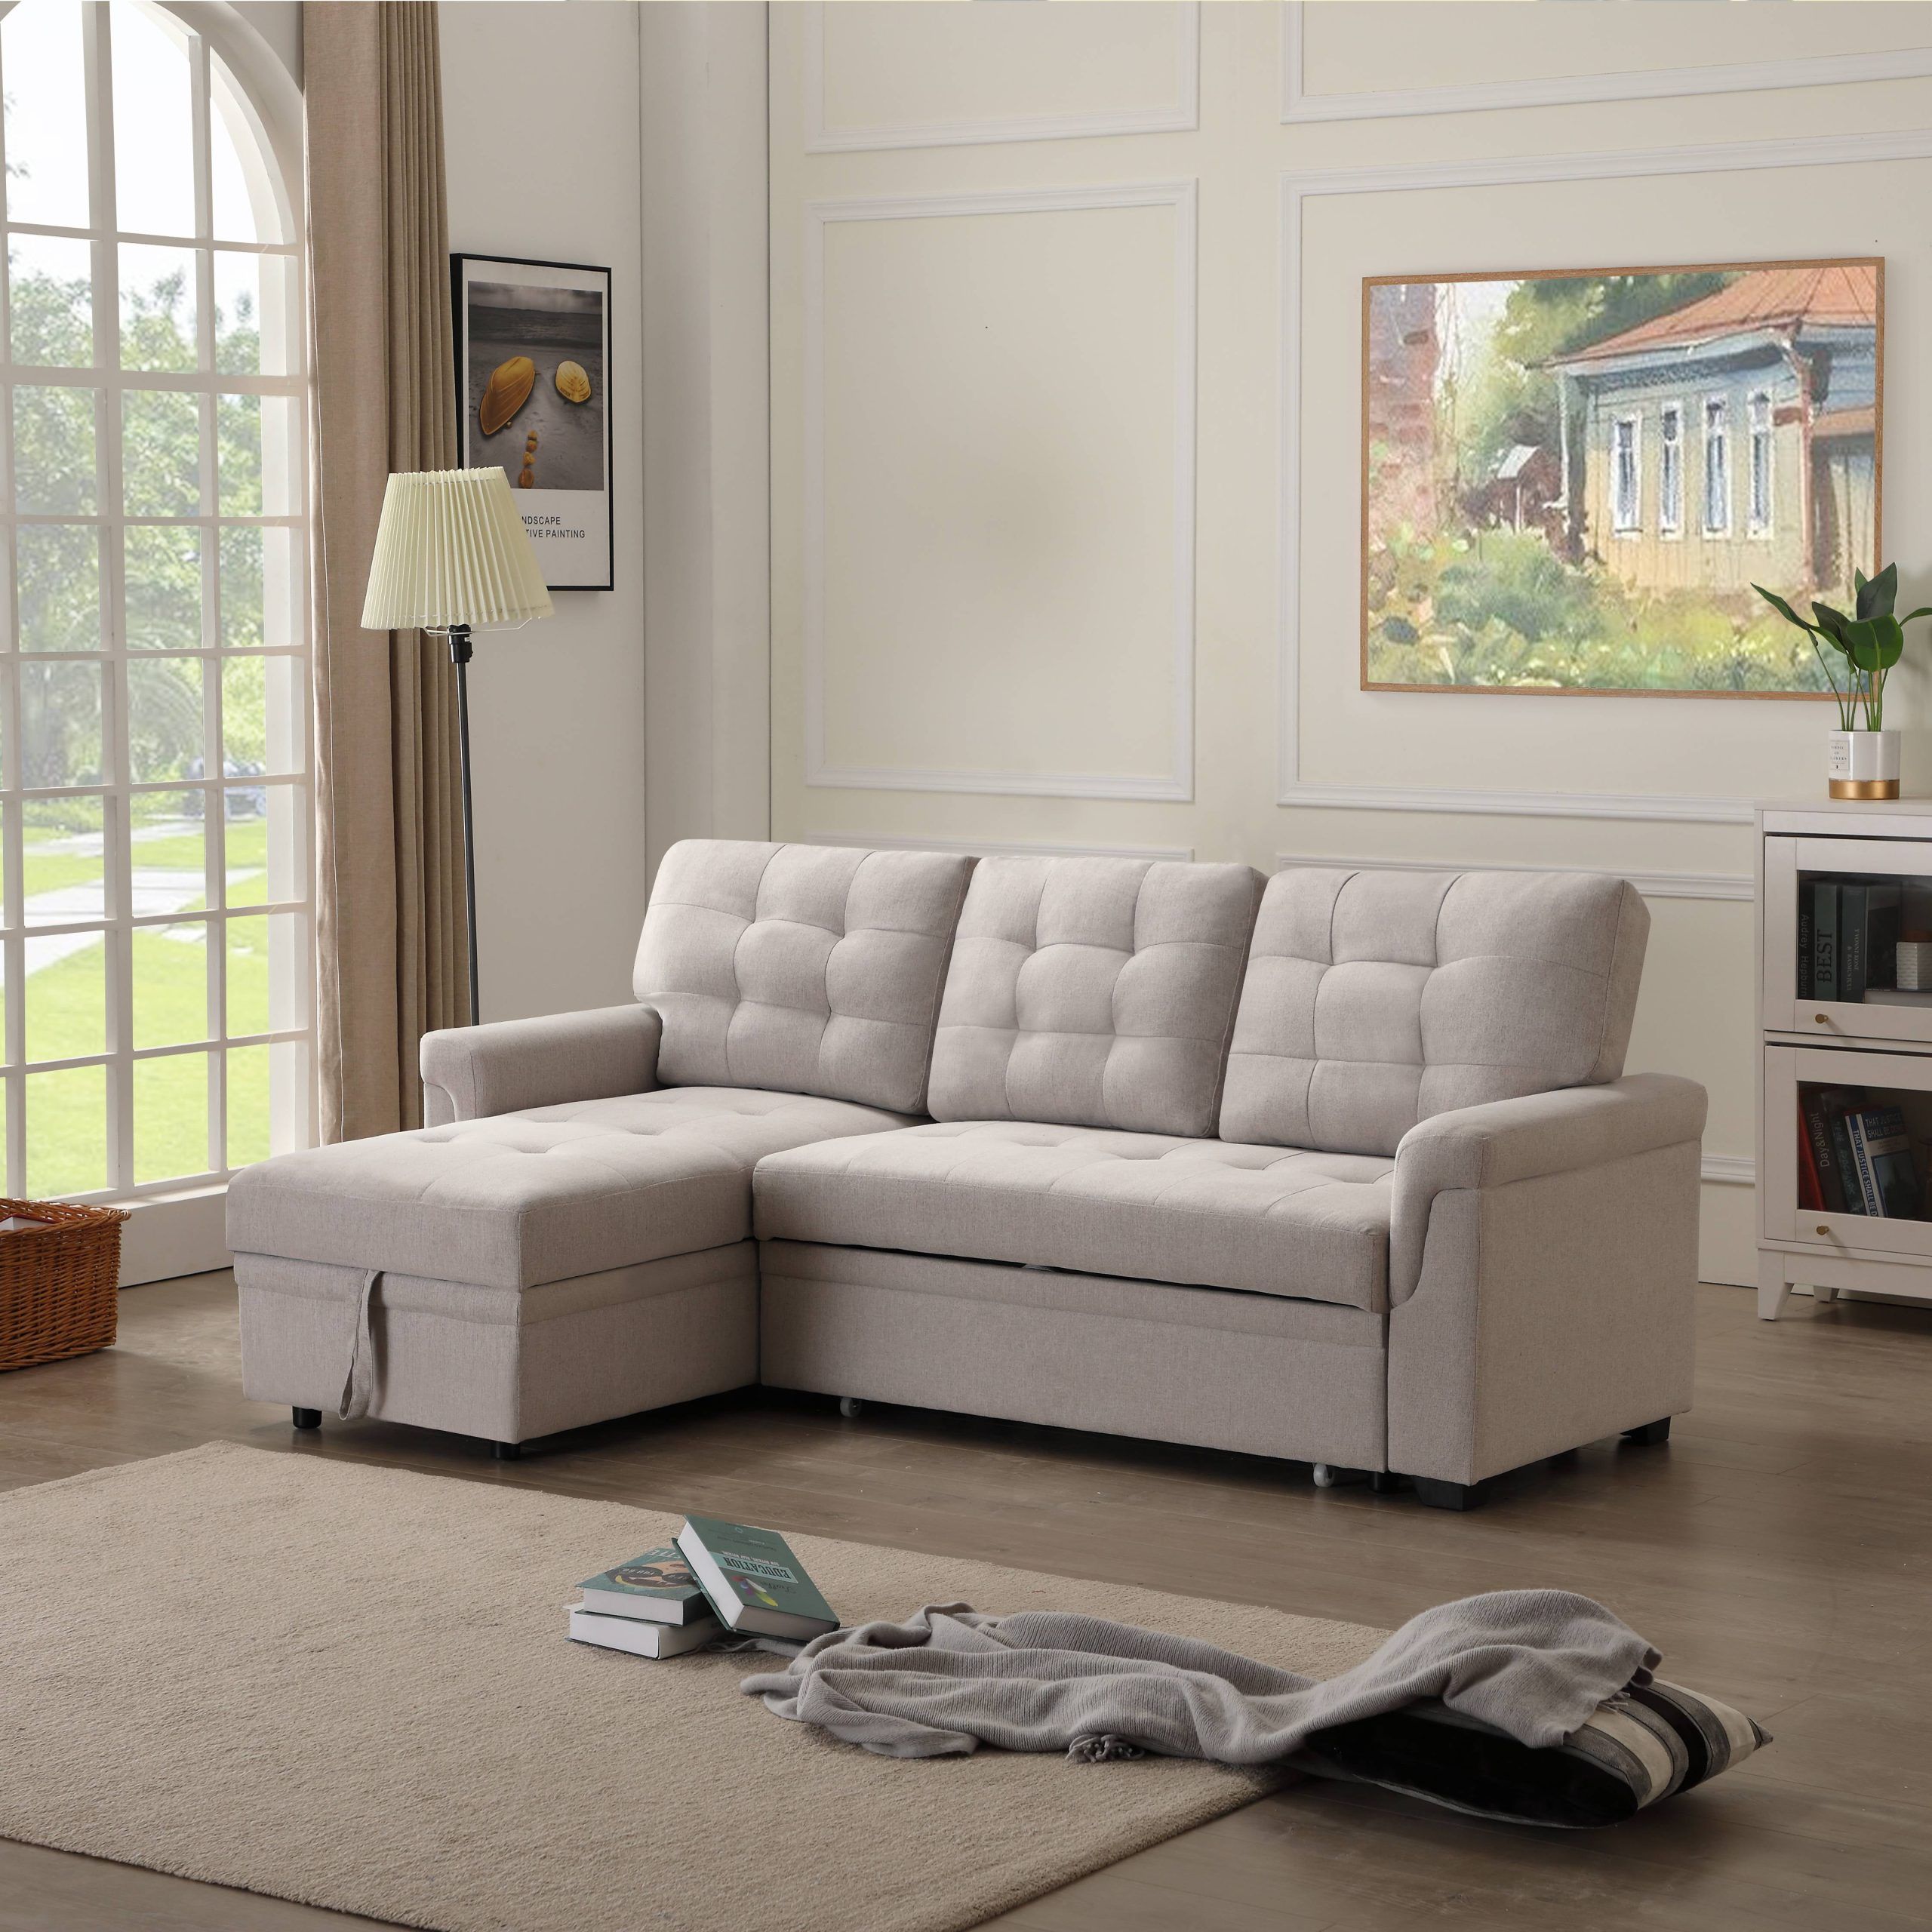 L Shaped Sectional Sofa Bed With Reversible Chaise, 86"w Modern 3 Seat Throughout L Shape Couches With Reversible Chaises (View 9 of 20)